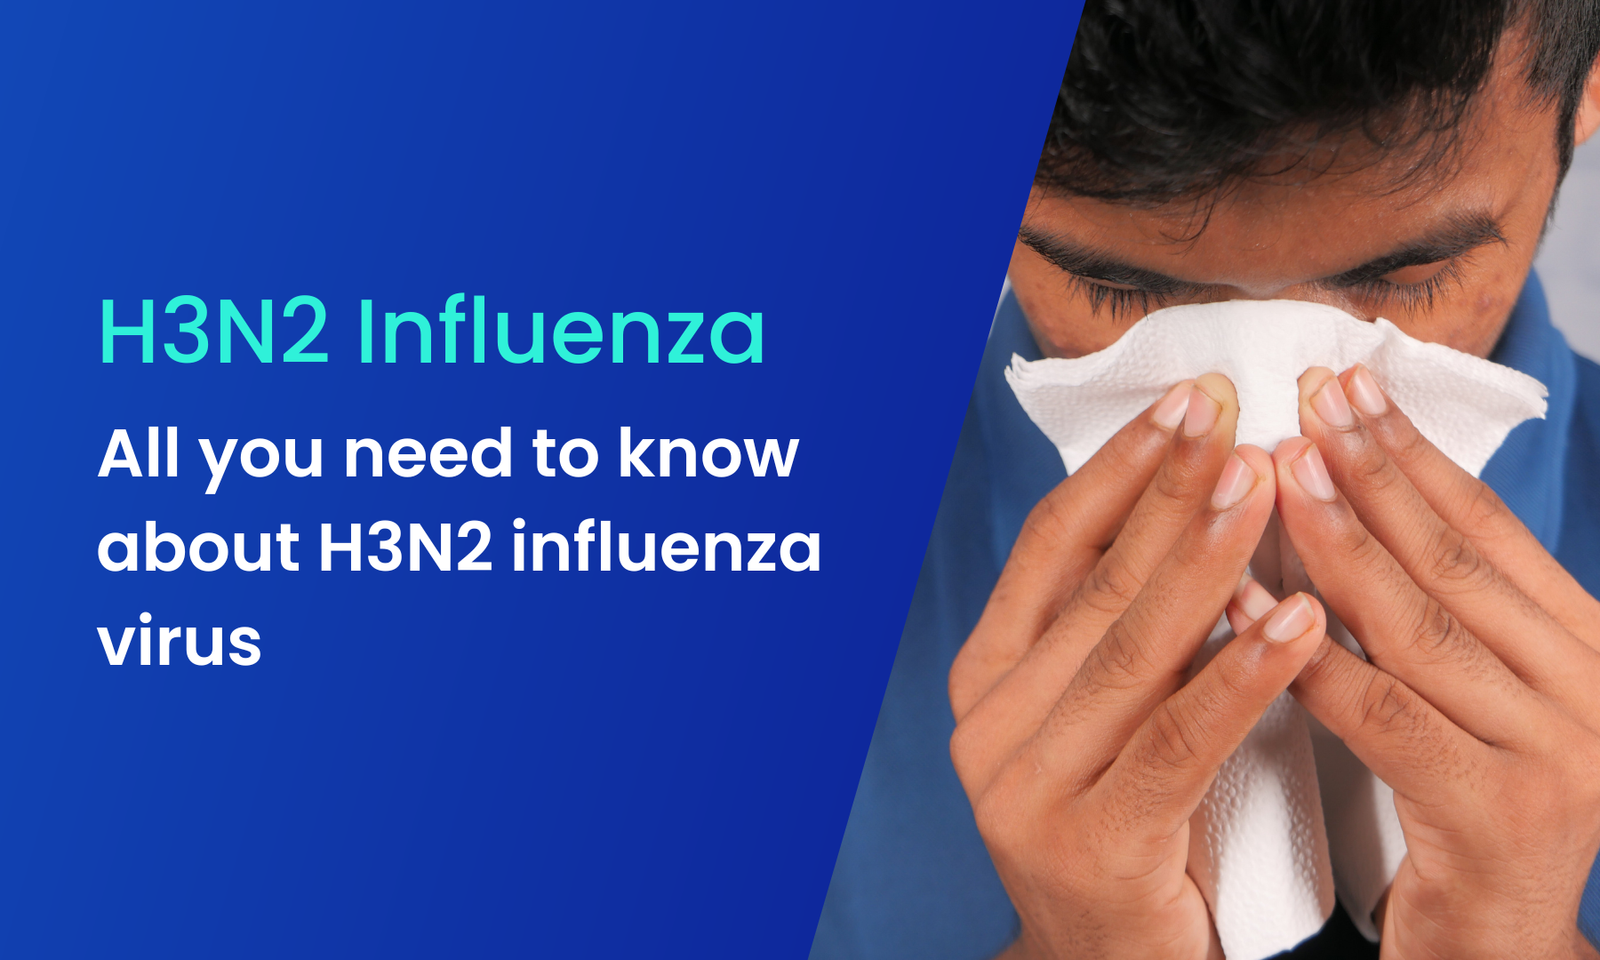 Everything you need to know about H3N2 influenza virus